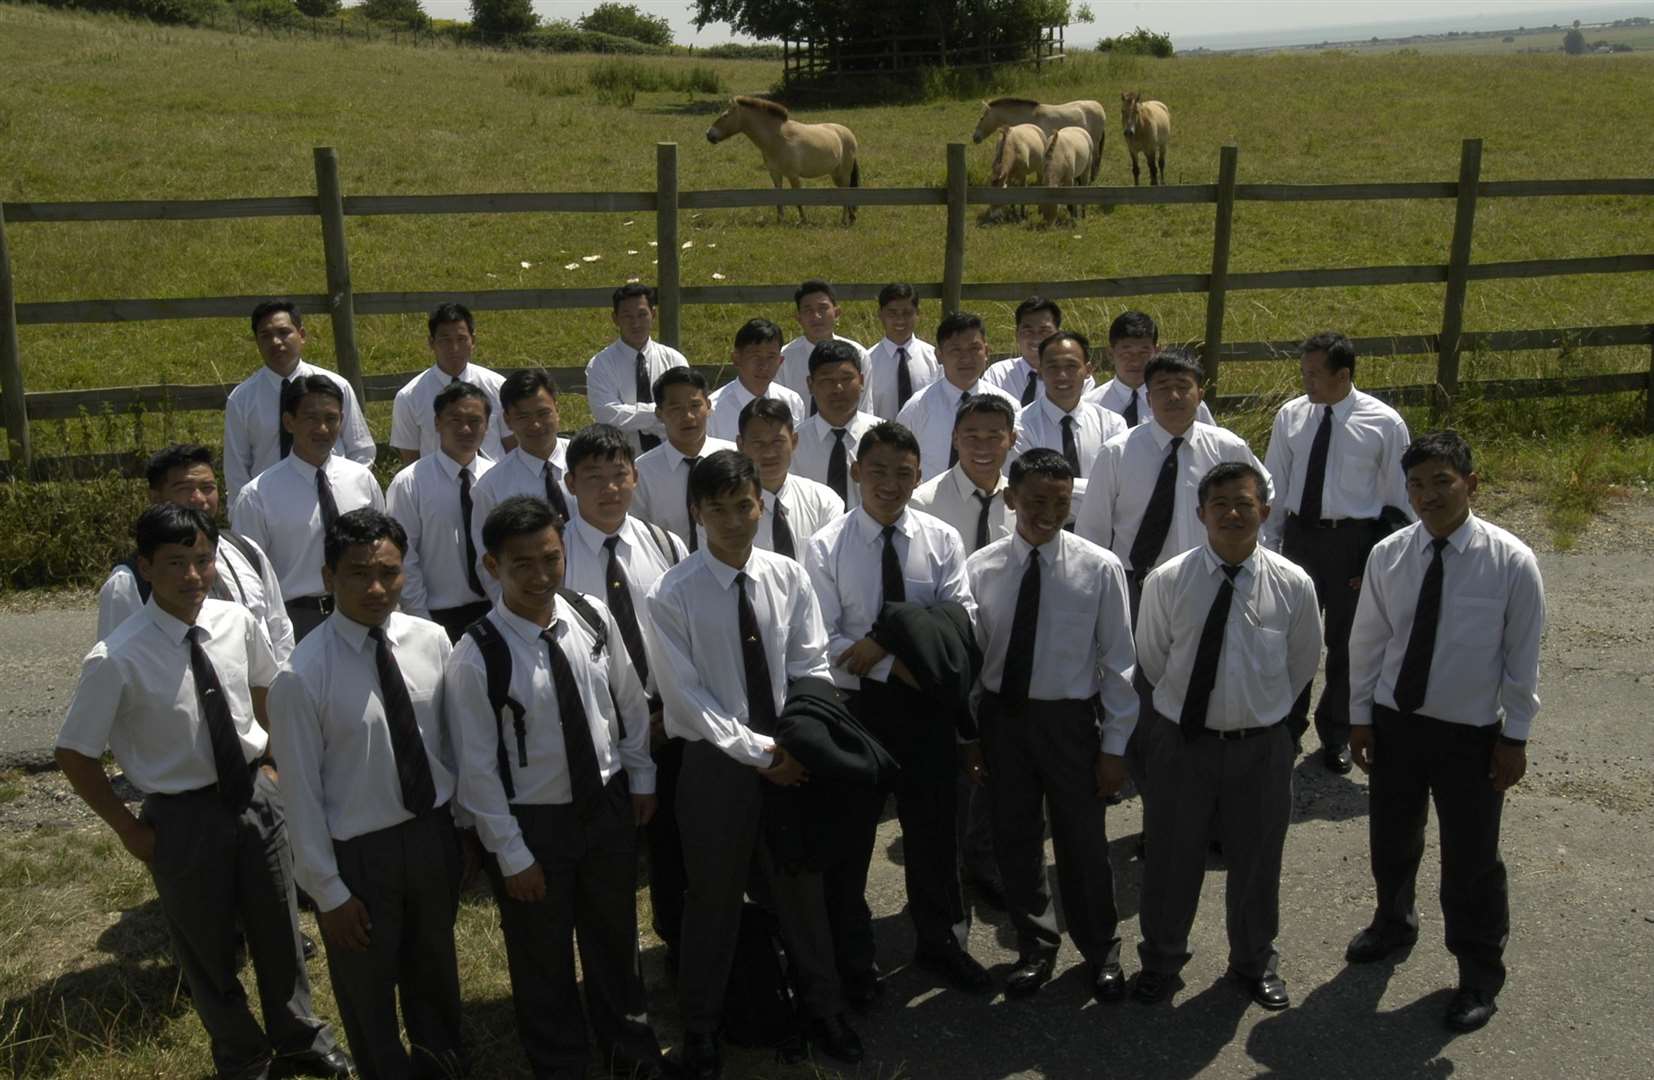 In July 2003, the Royal Gurkha Rifles who helped build the chalk white horse at Folkestone visited the Przewalski horses at Port Lympne, which helped inspire the landmark